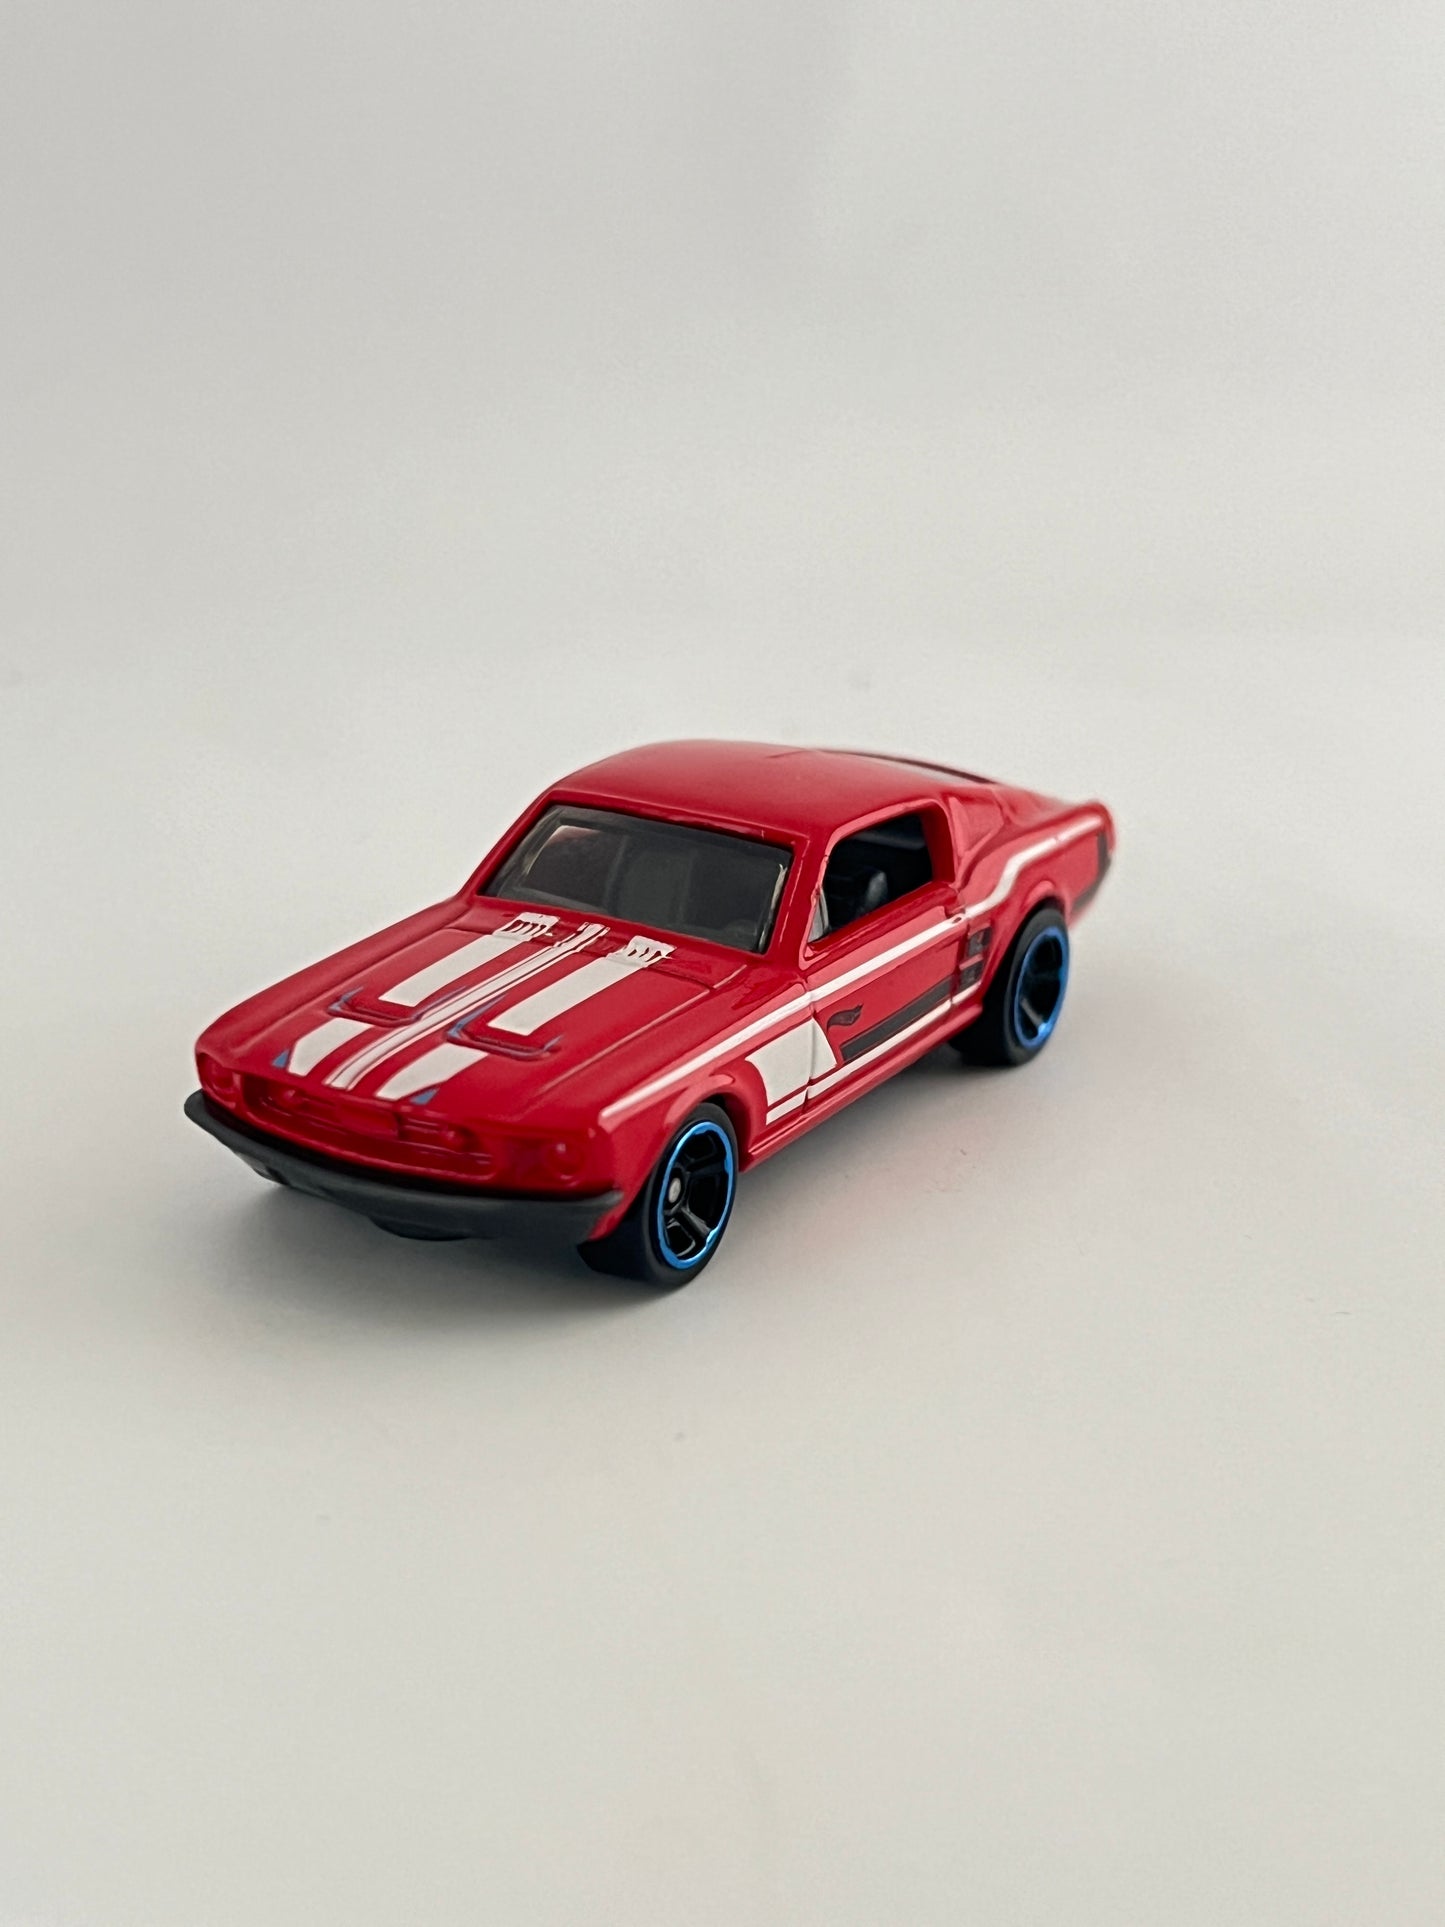 67 MUSTANG - UNCARDED - MINT